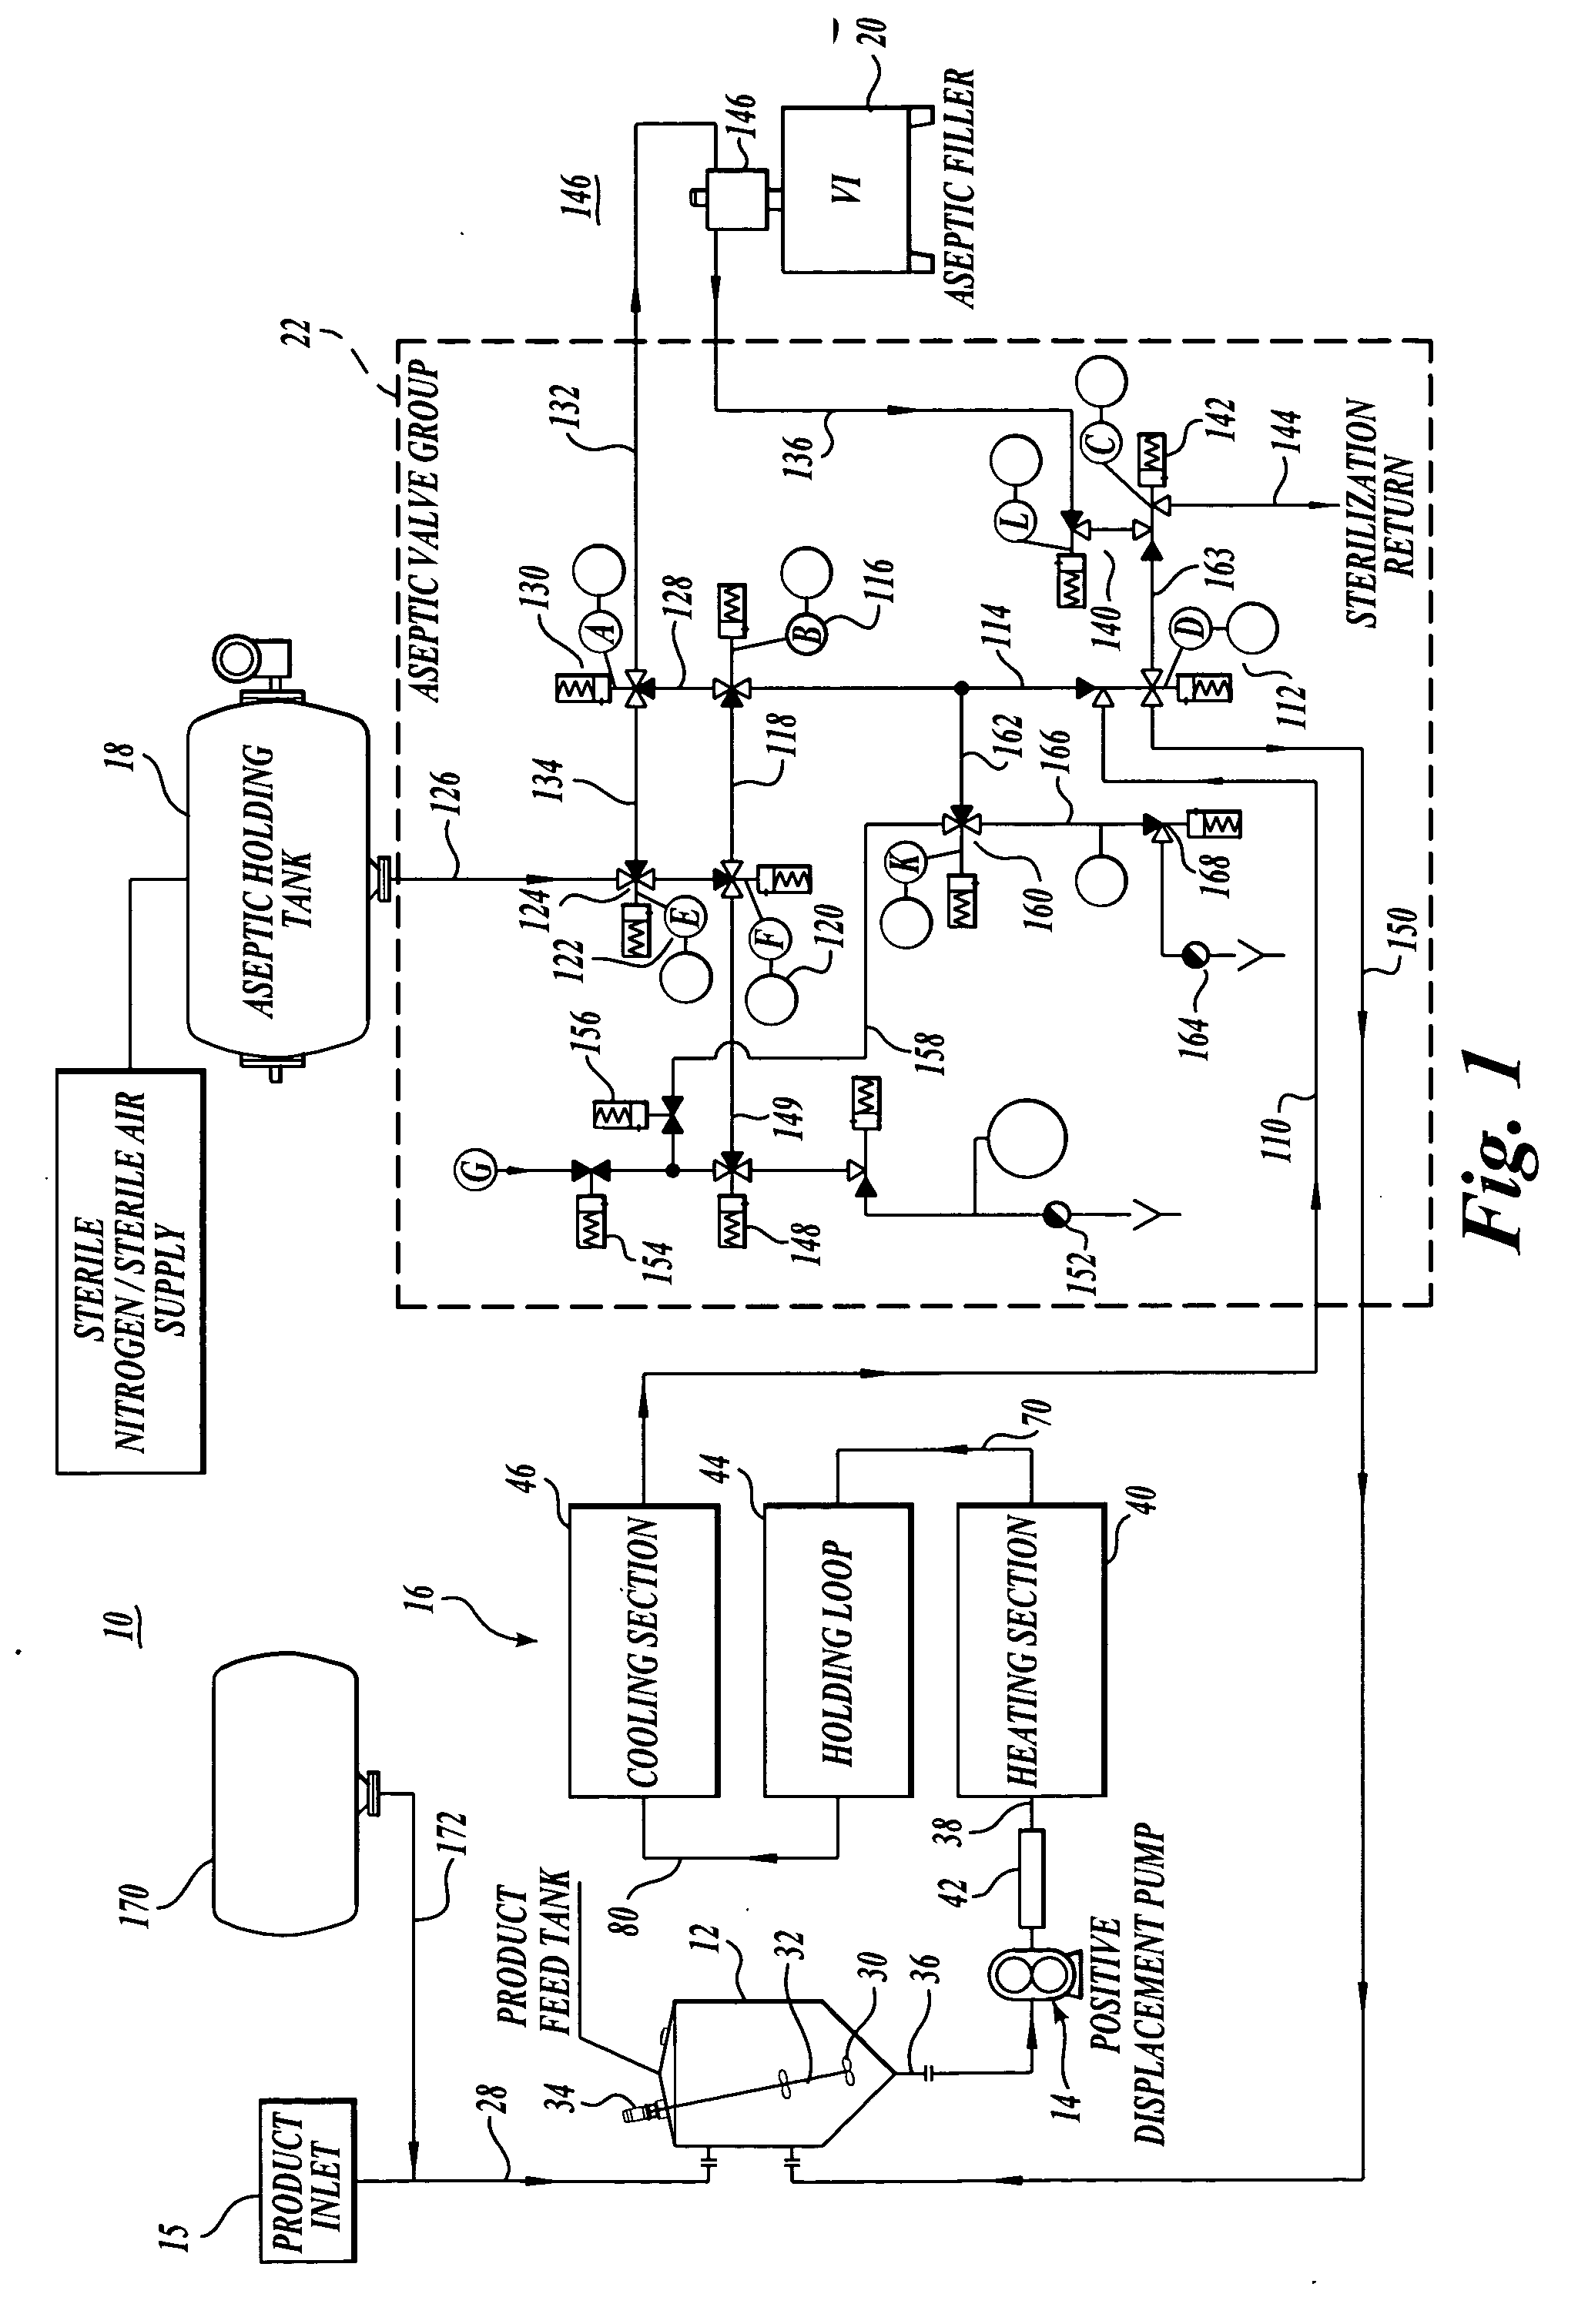 Aseptic processing system and method